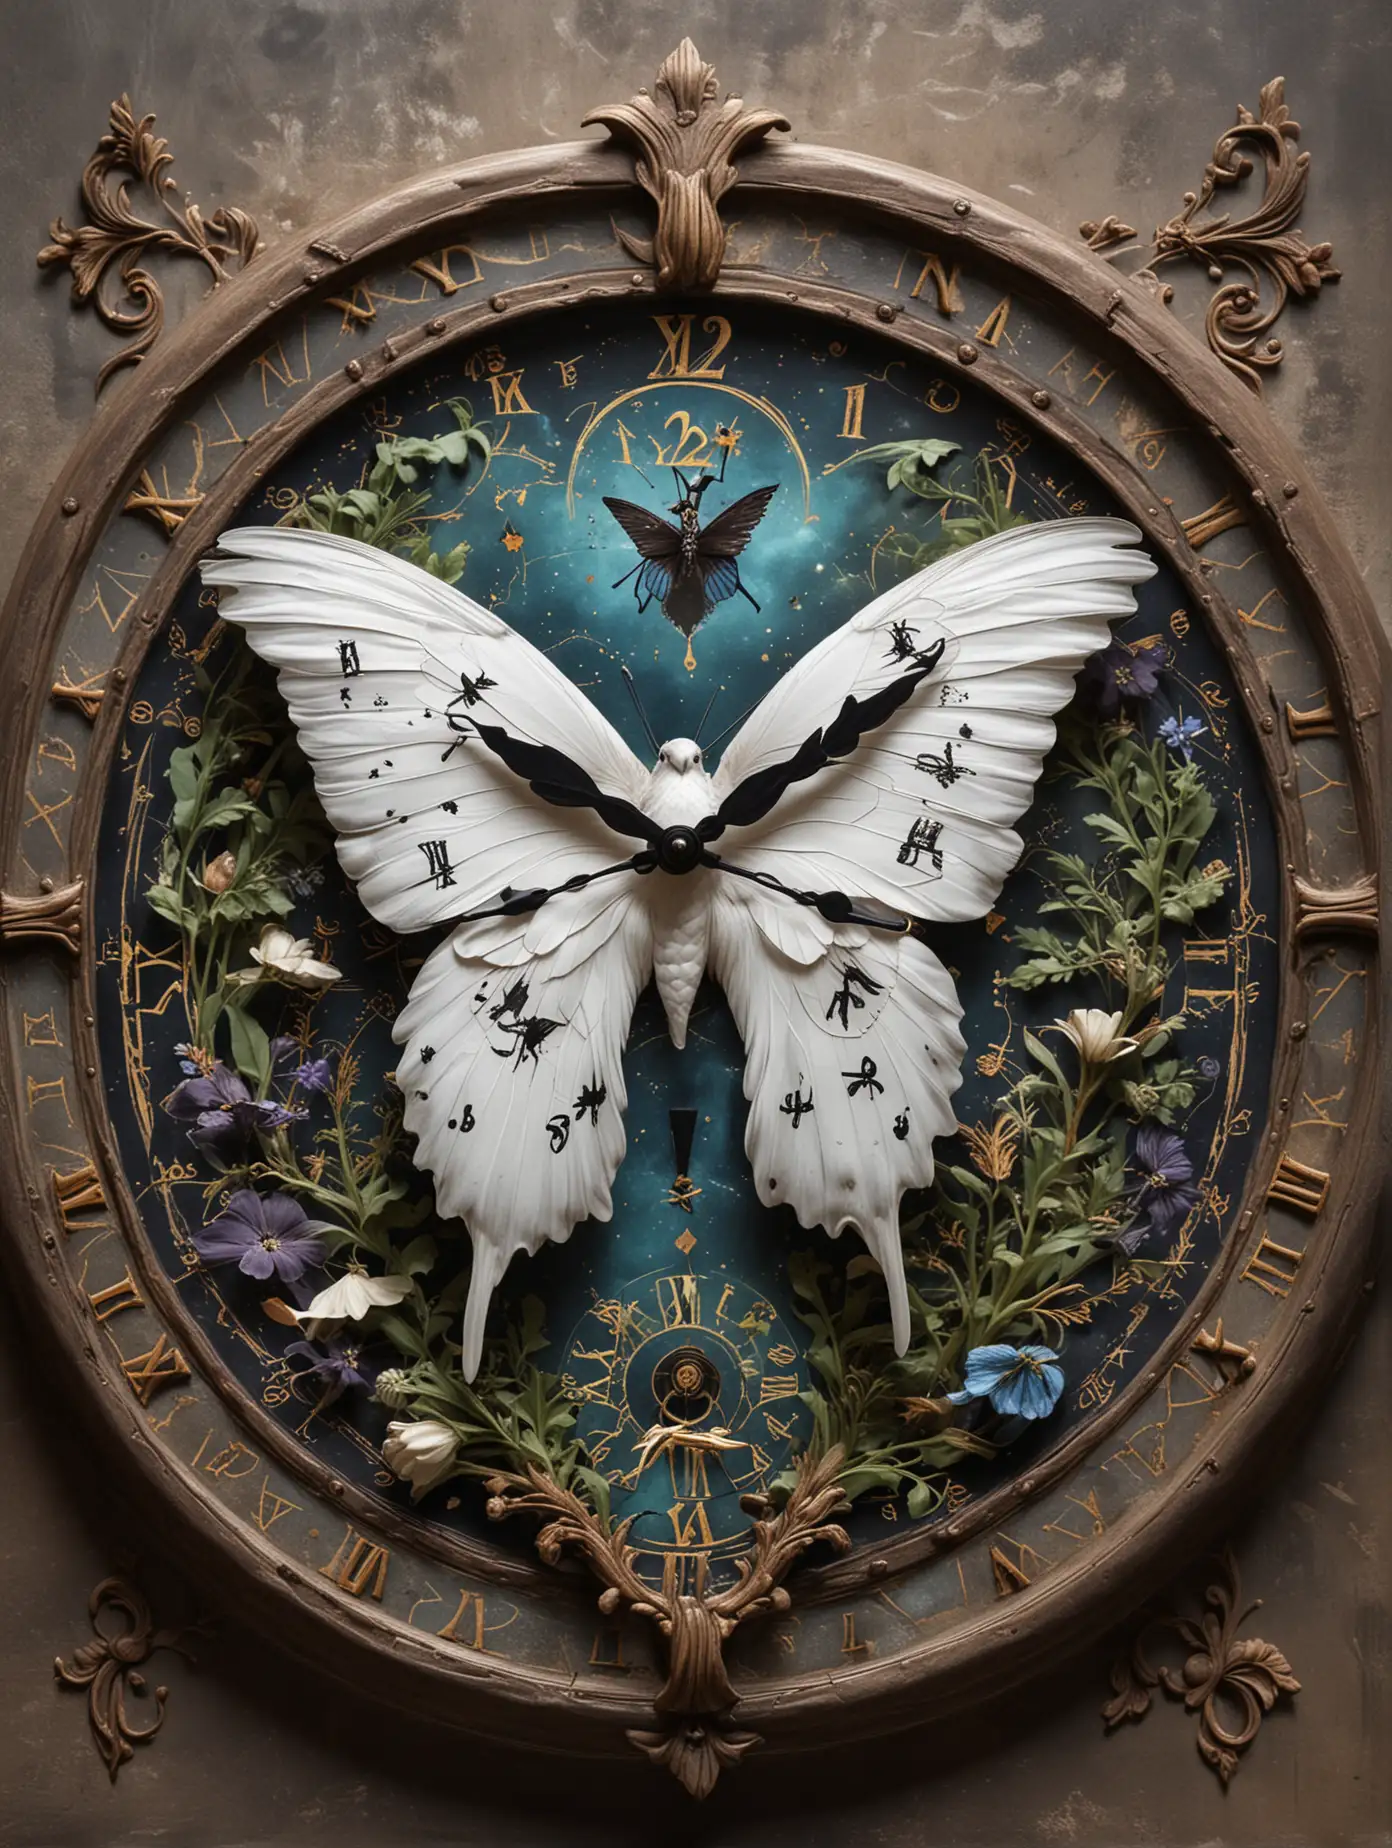 Magical Clock with Alchemical Symbols and Butterfly